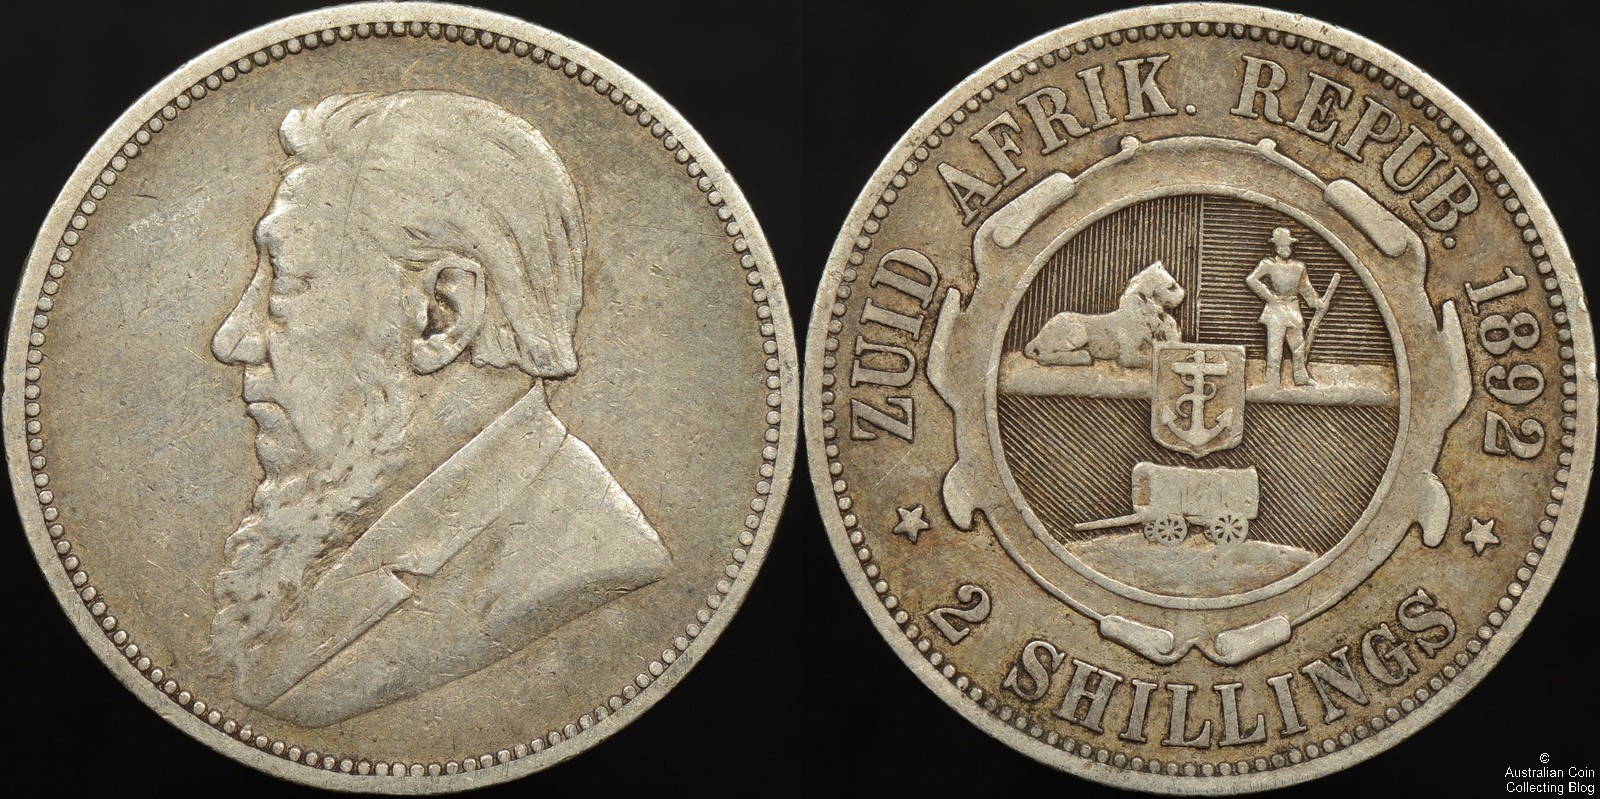 South Africa 1892 2 Shilling